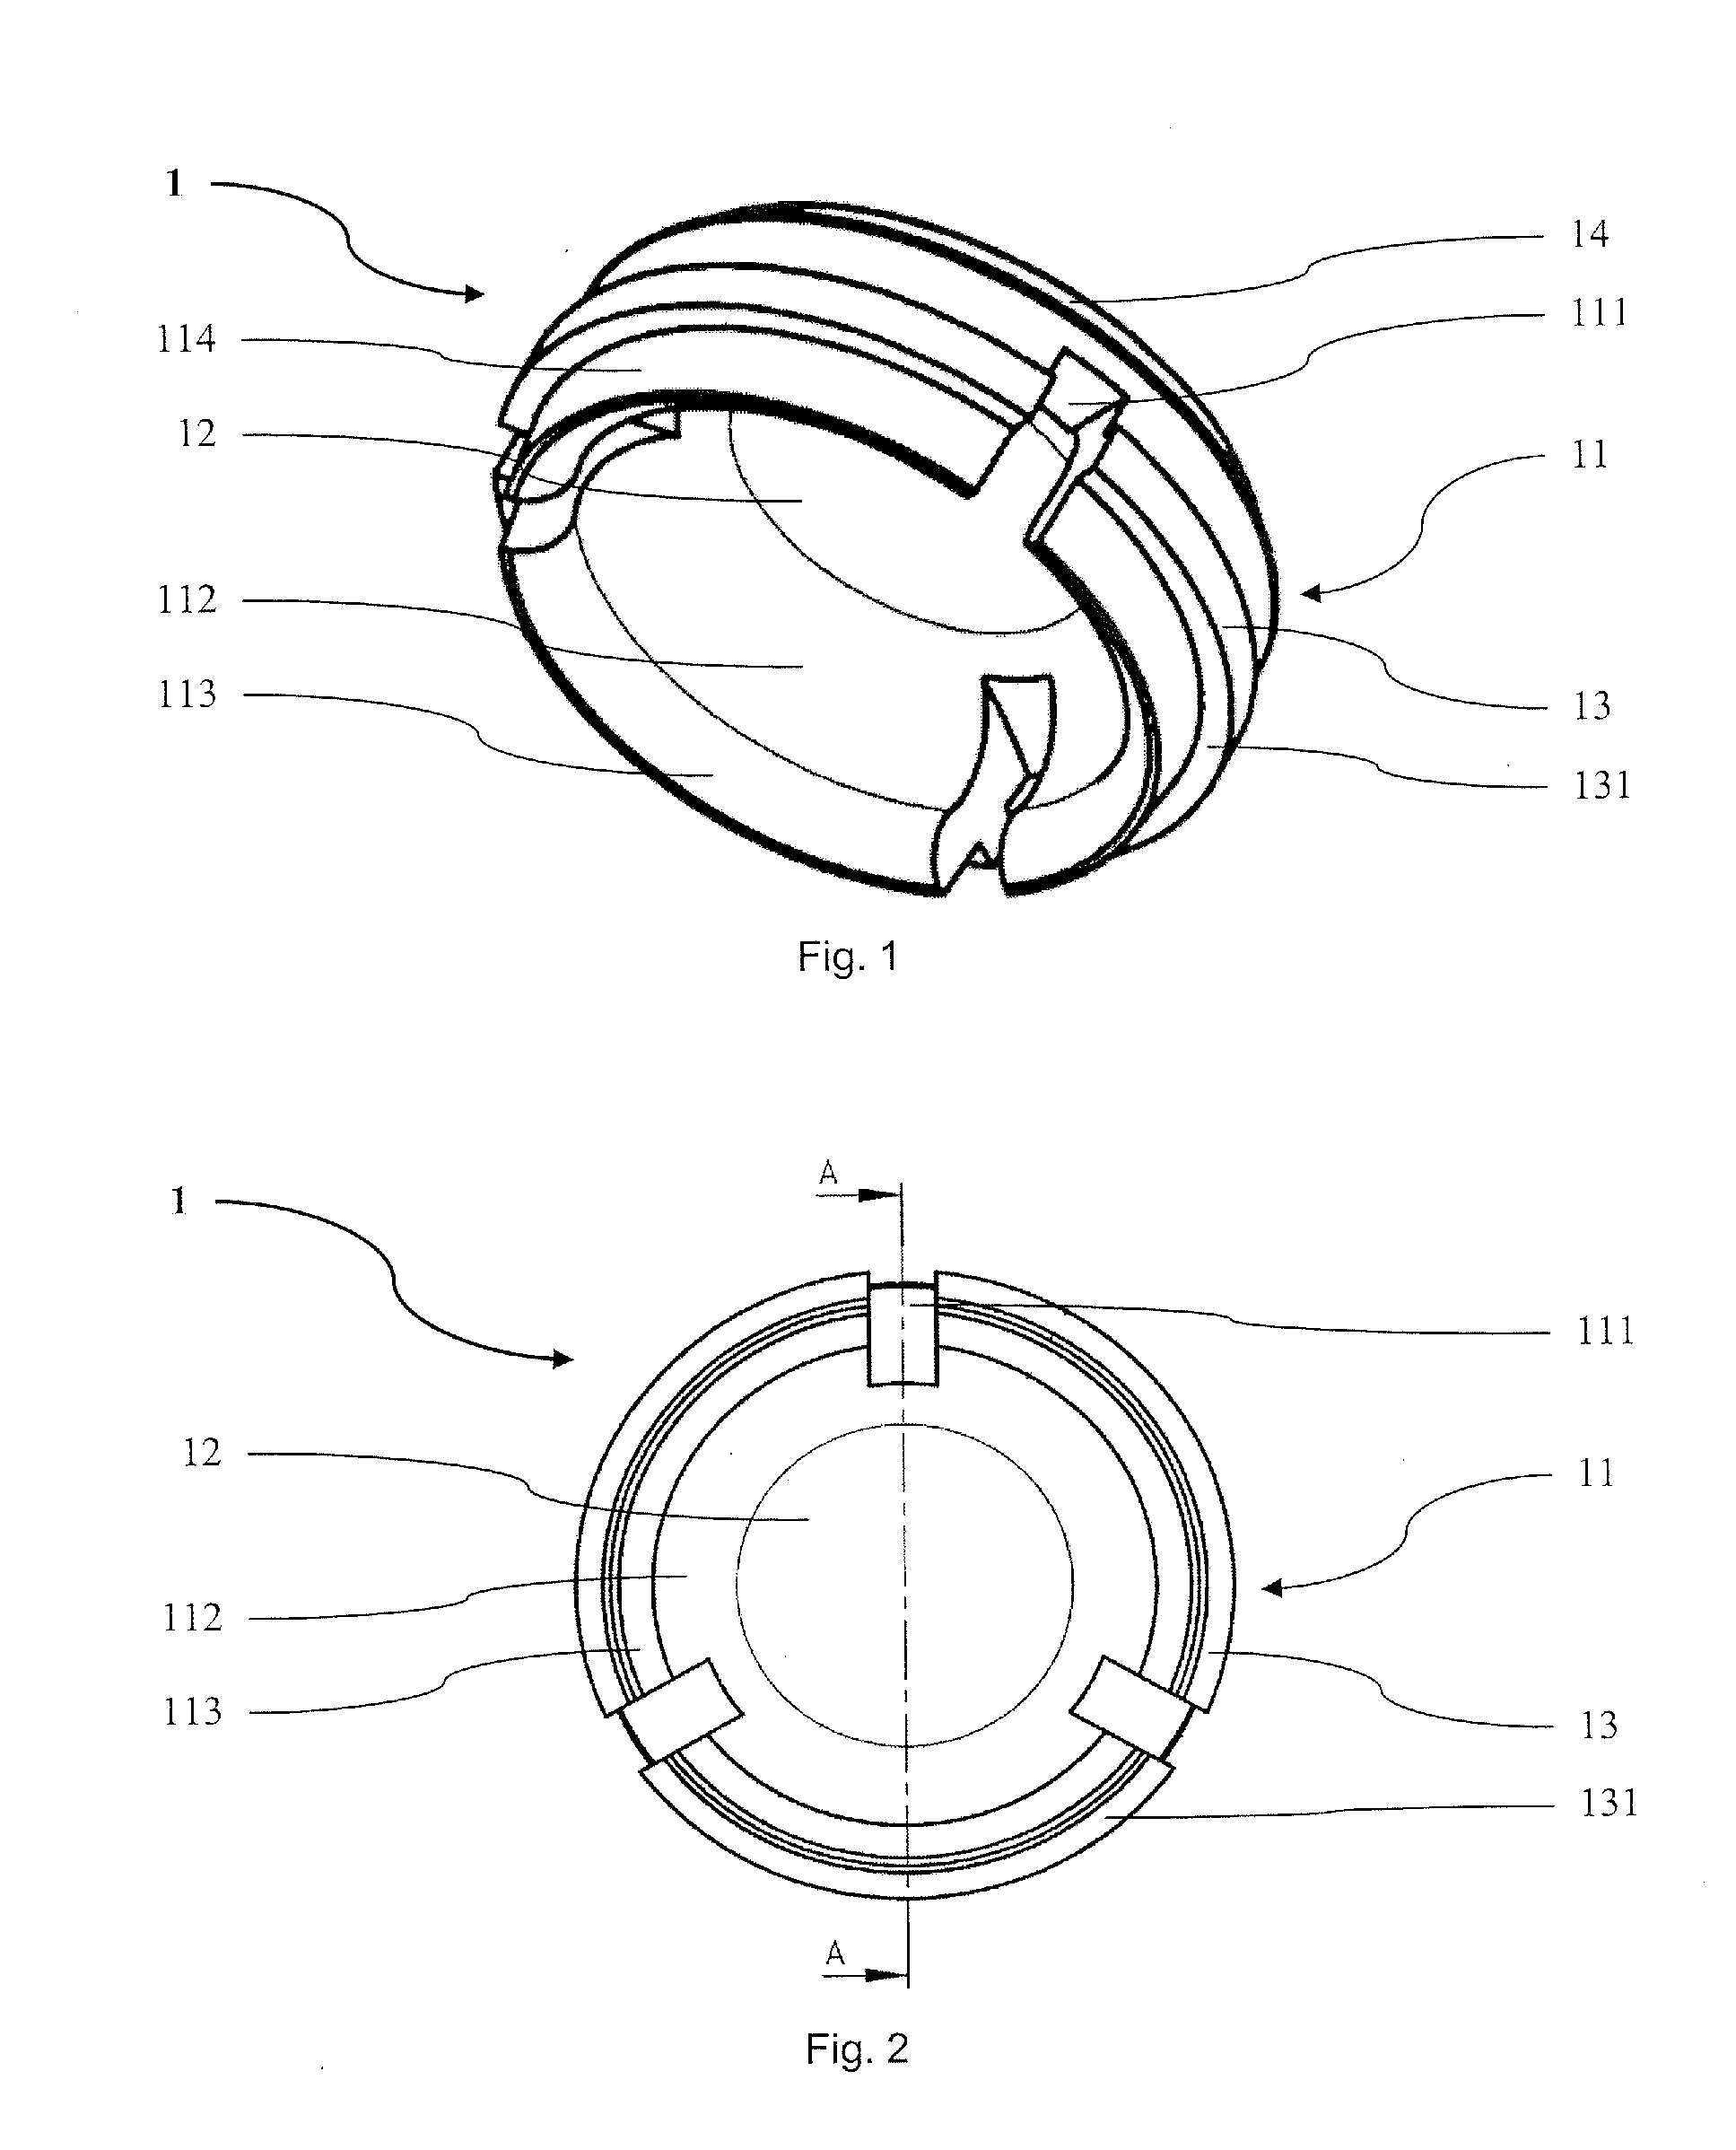 Connection of a prosthesis structure with an implant structure